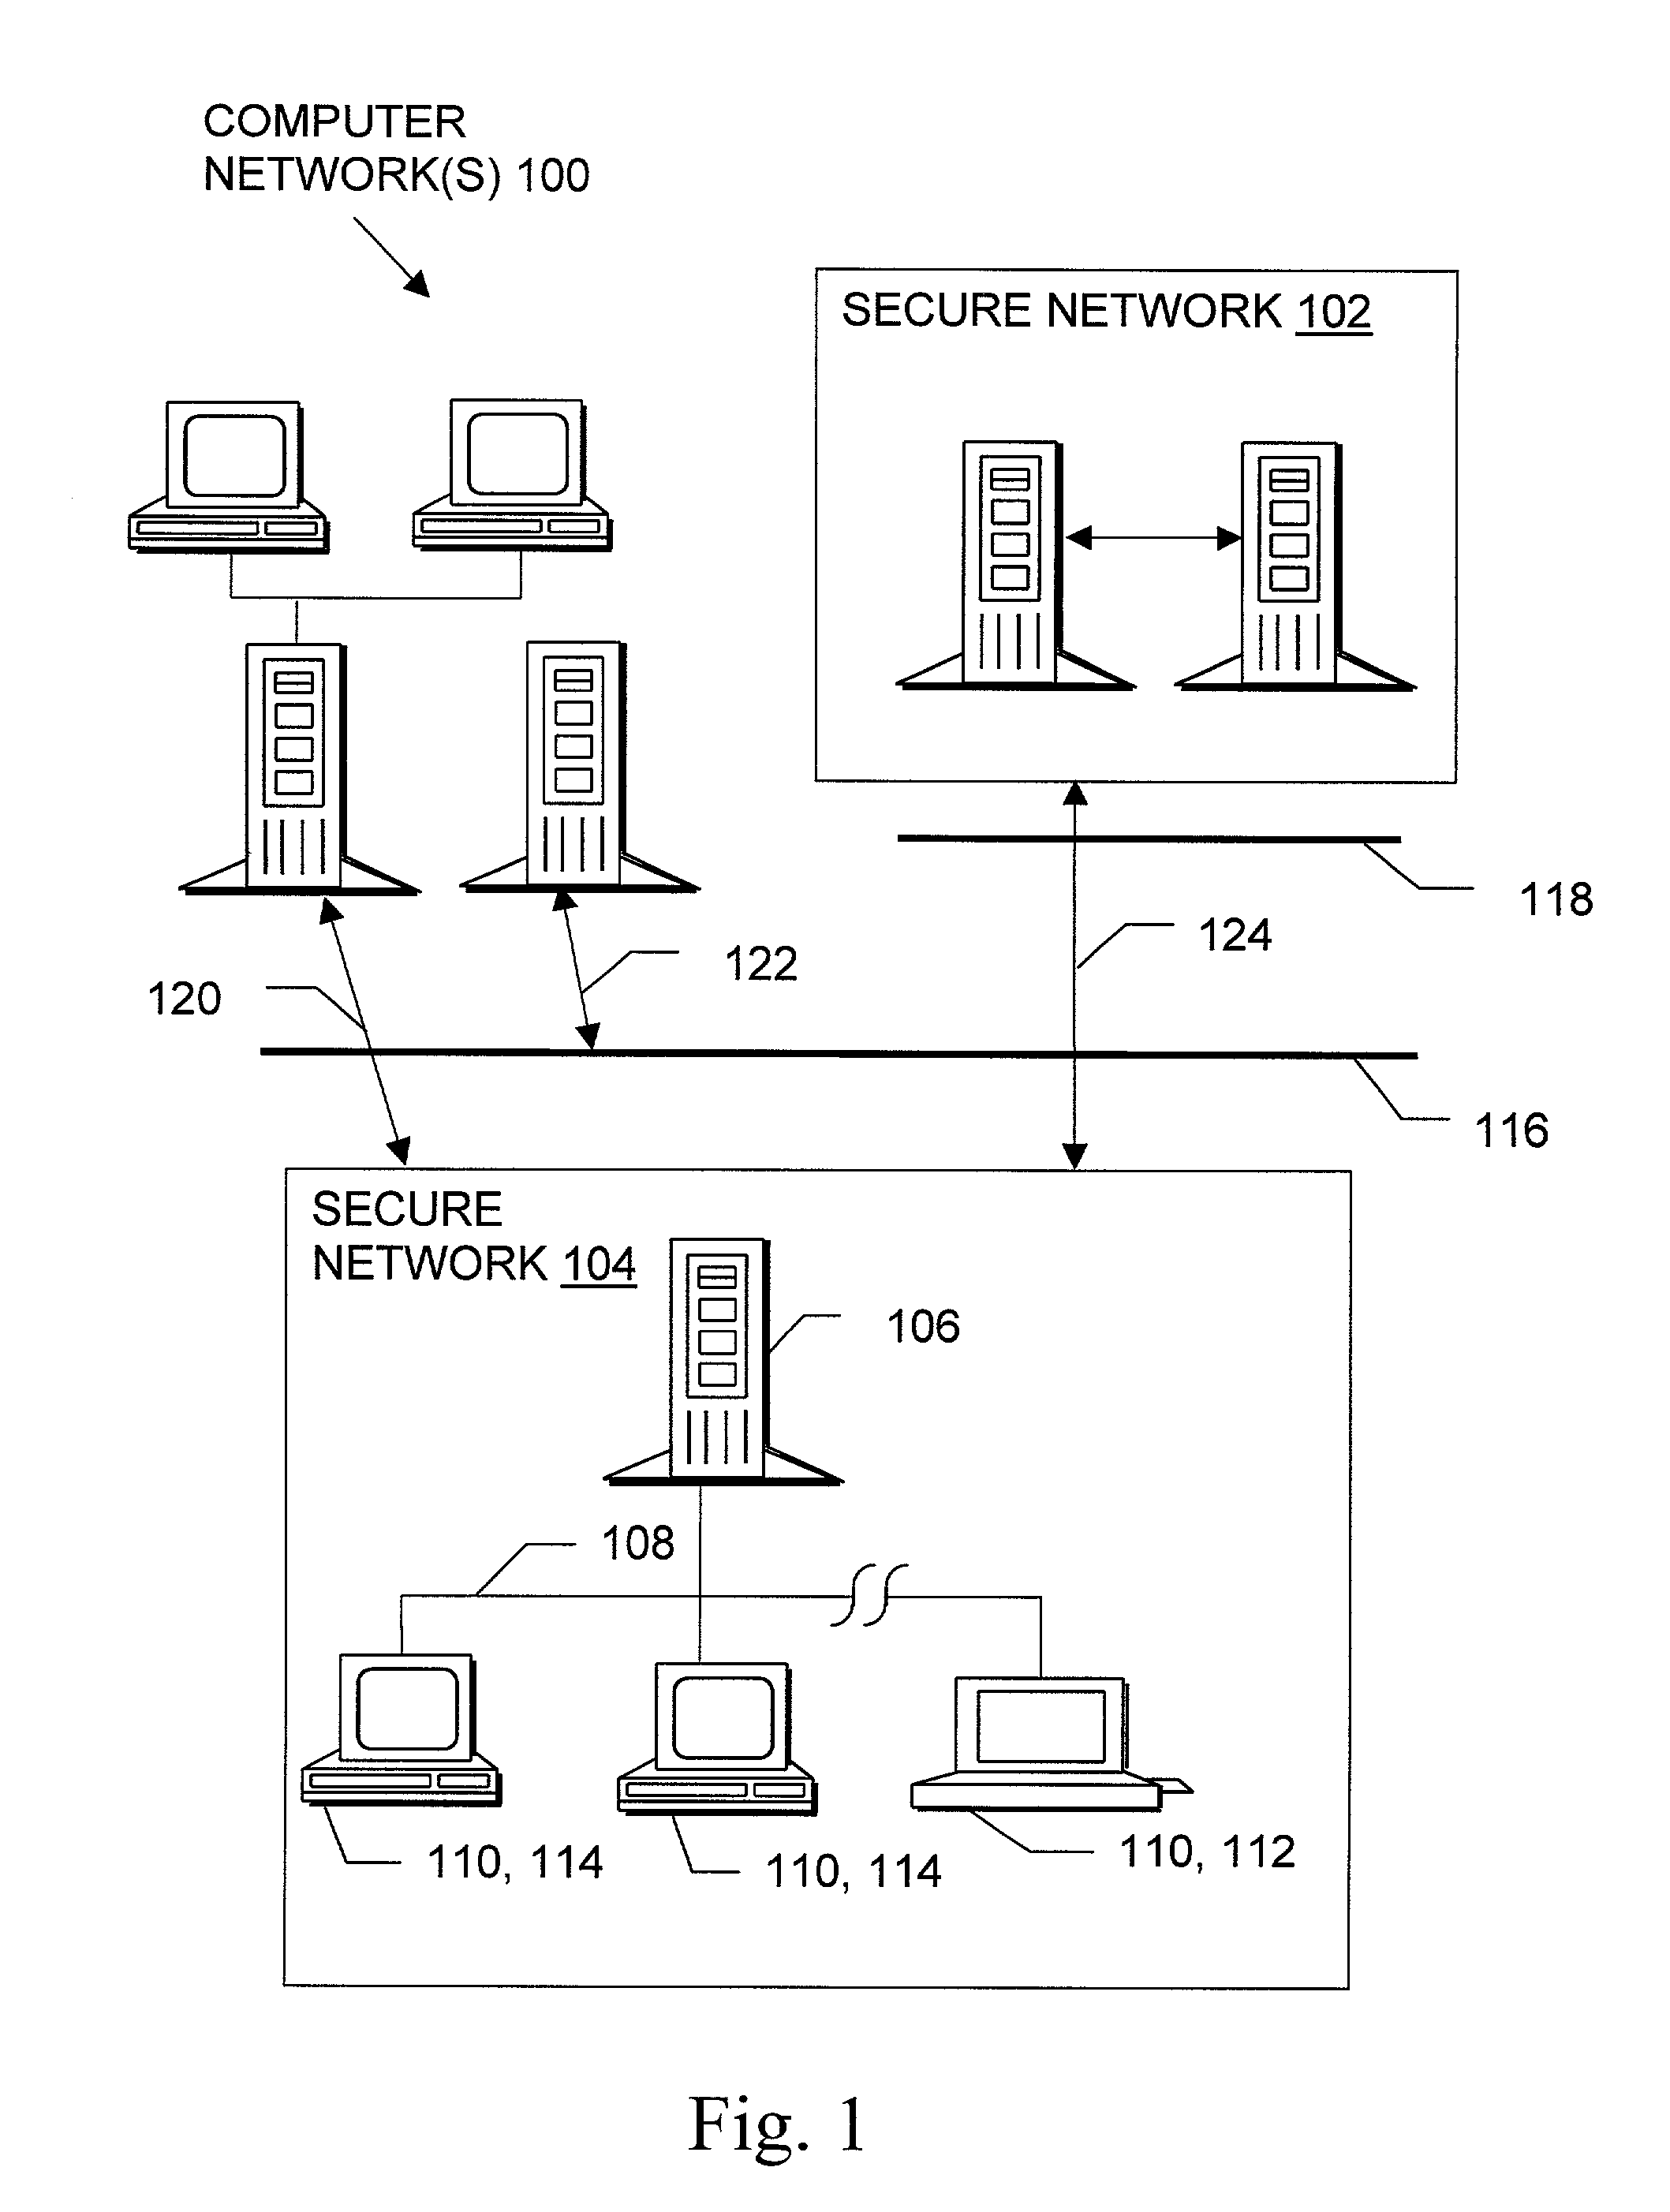 Non-invasive automatic offsite patch fingerprinting and updating system and method